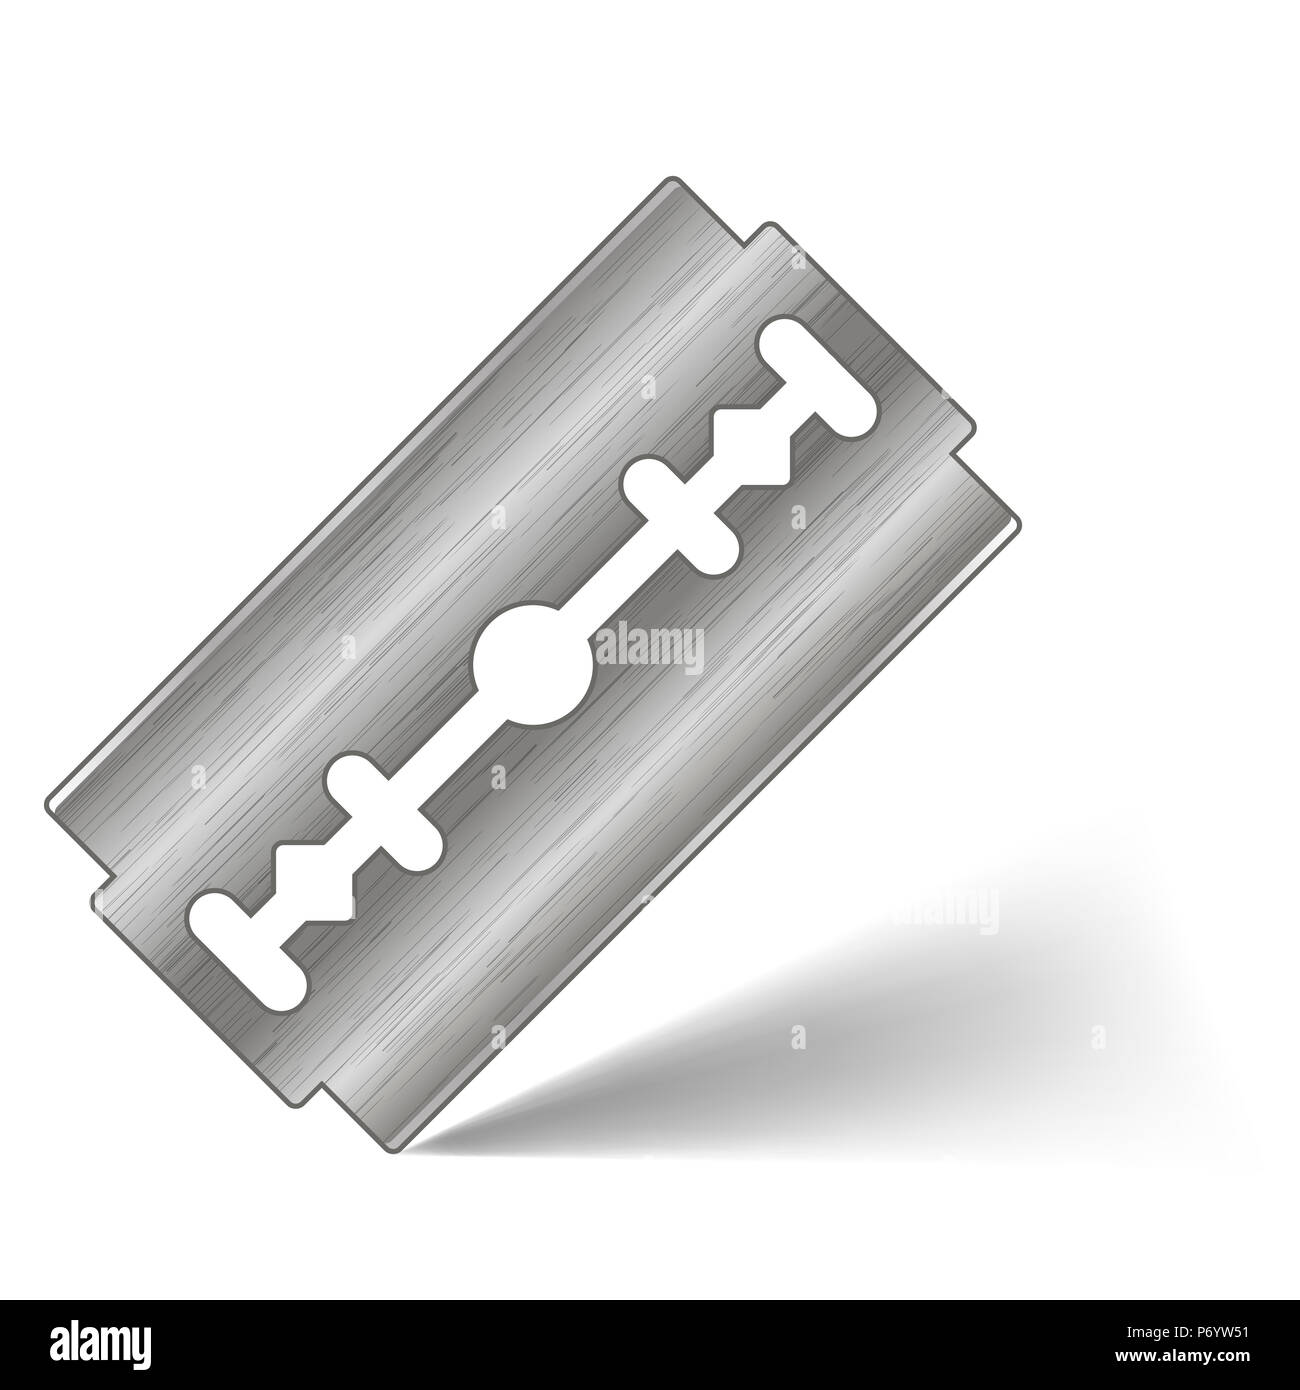 Traditional Double Edge Razor Blade. Tool for Haircut and Shave. Stainless Steel Sheving Equipment. Stock Photo